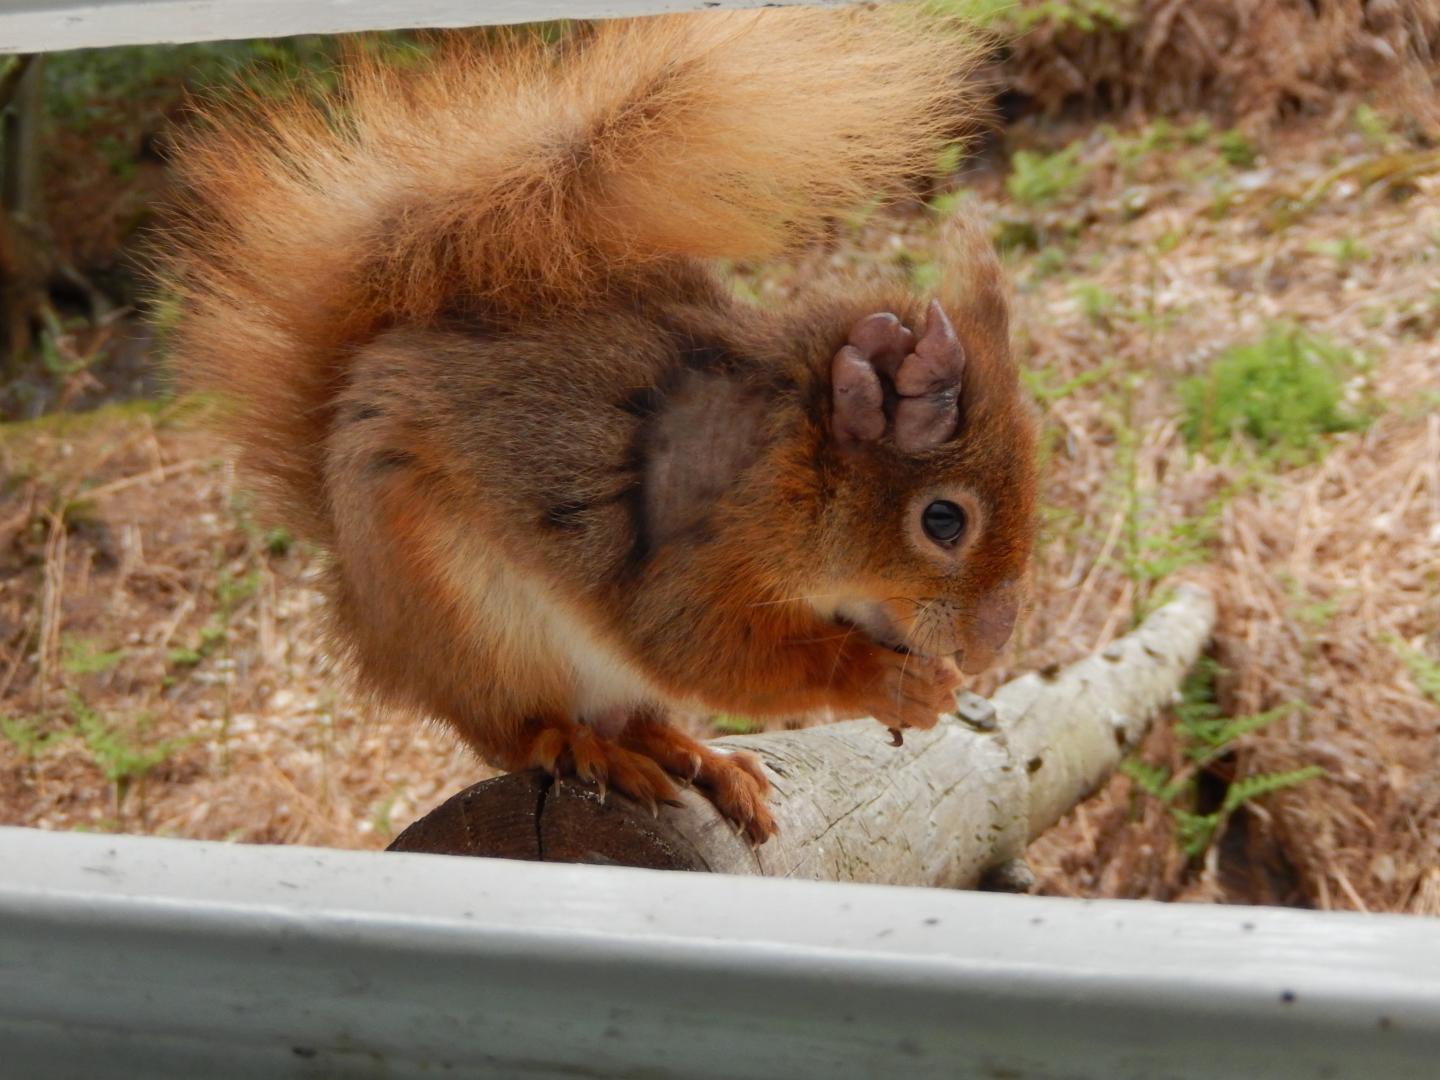 A Red Squirrel with Leprosy on its Ear